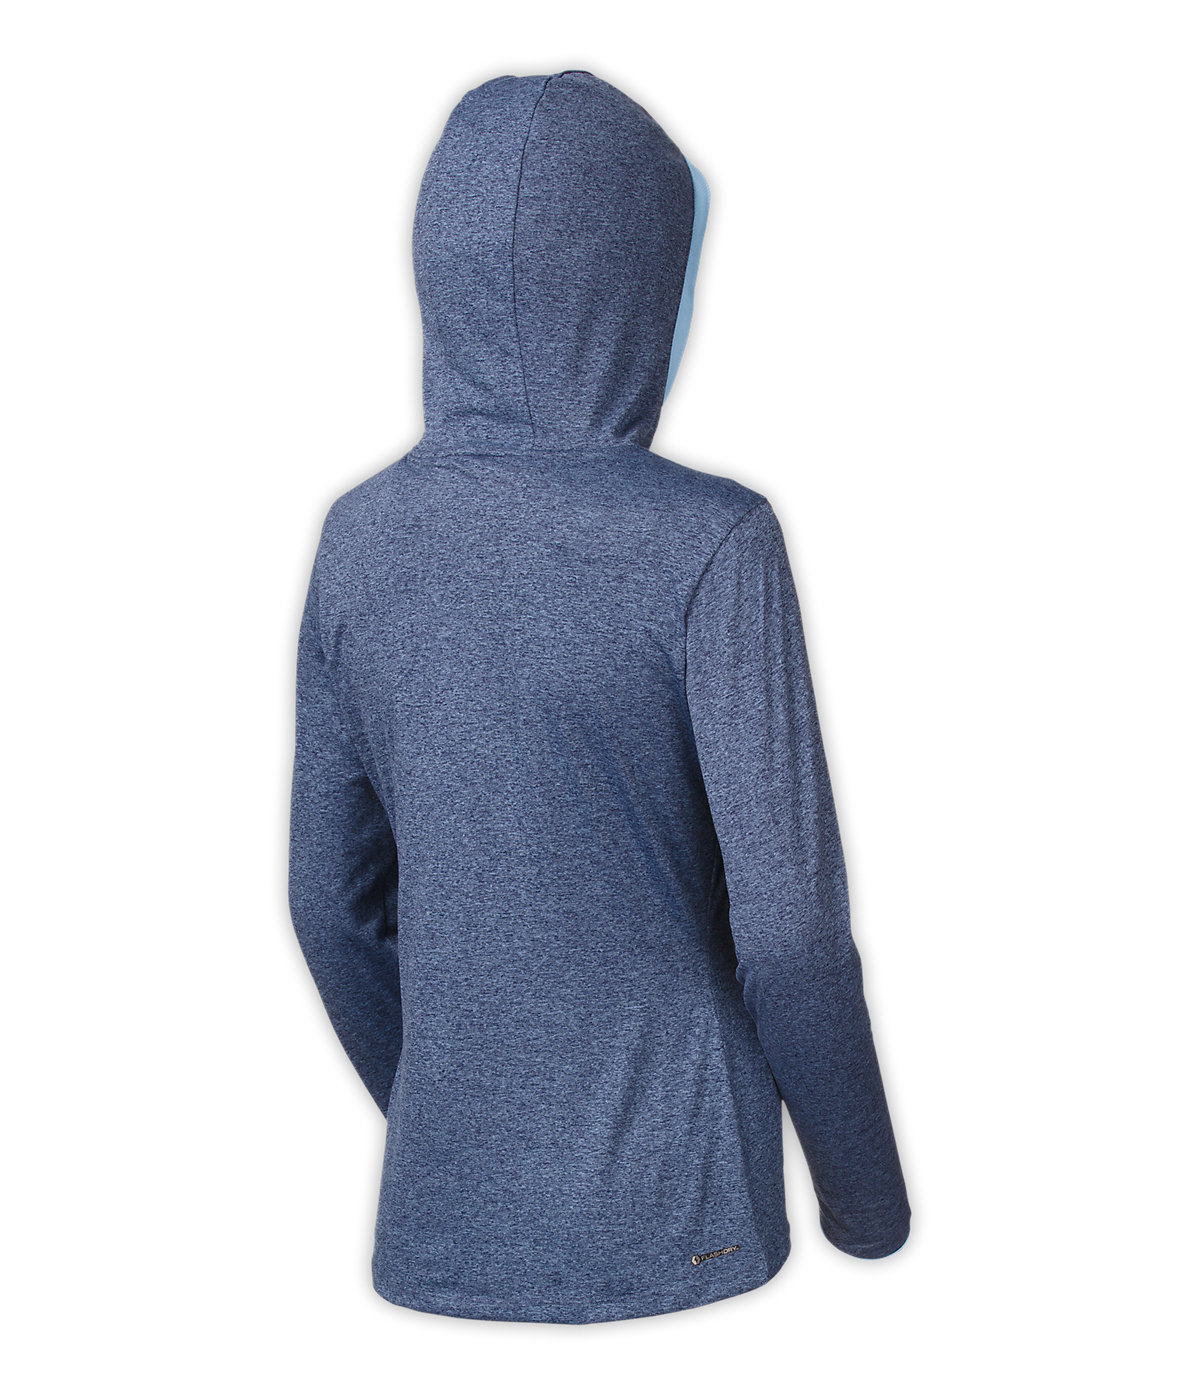 The North Face Women's Reactor Hoodie